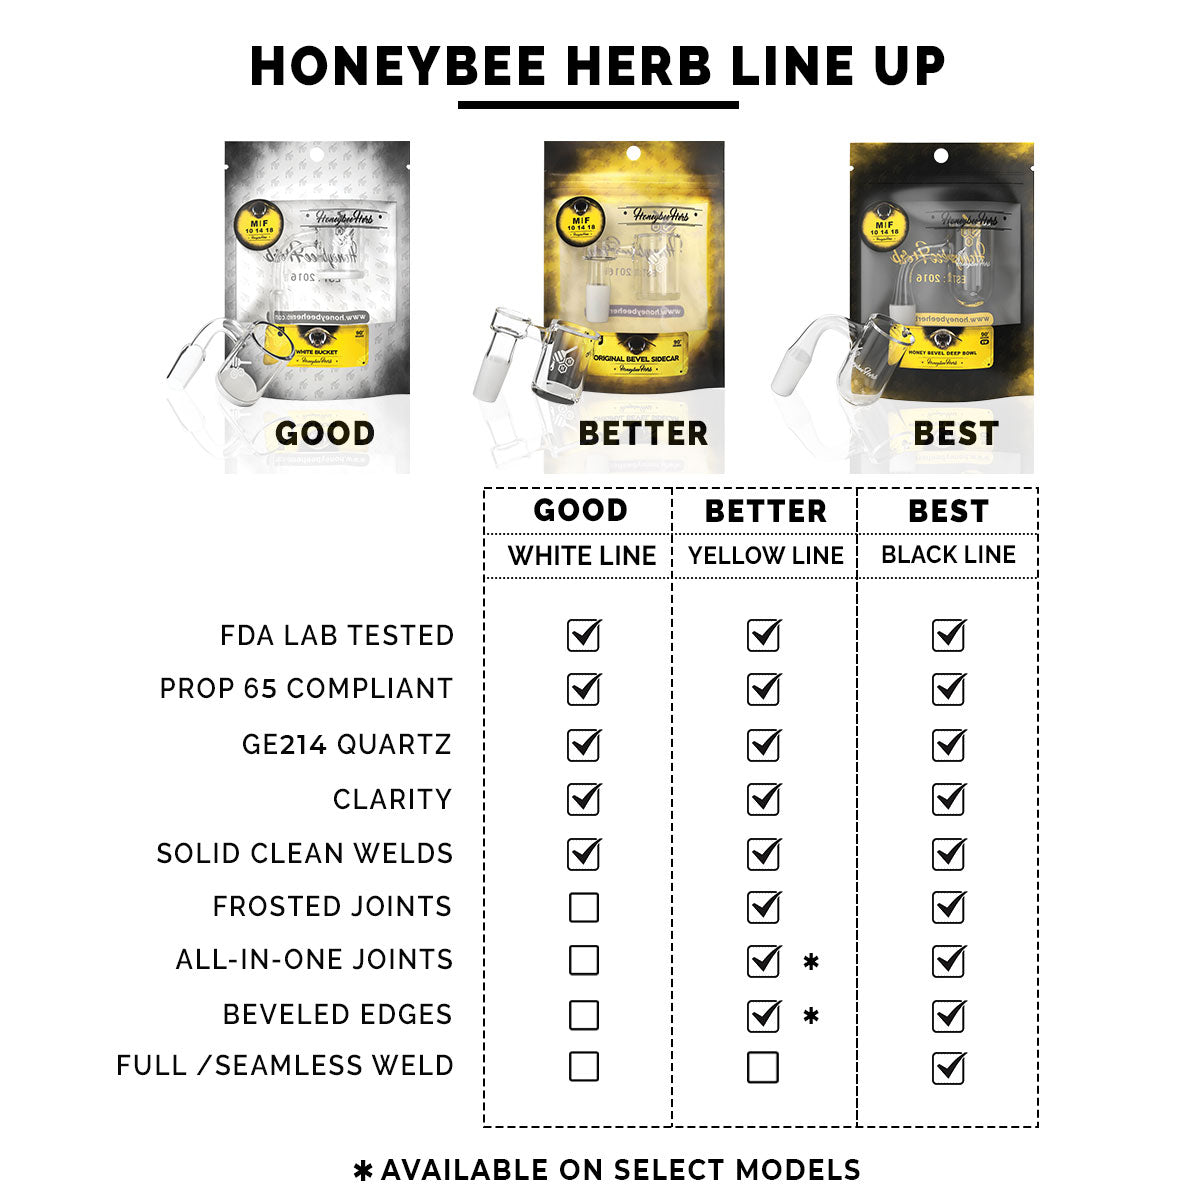 Honeybee Herb line-up chart showing quality tiers of dab rig accessories with features list